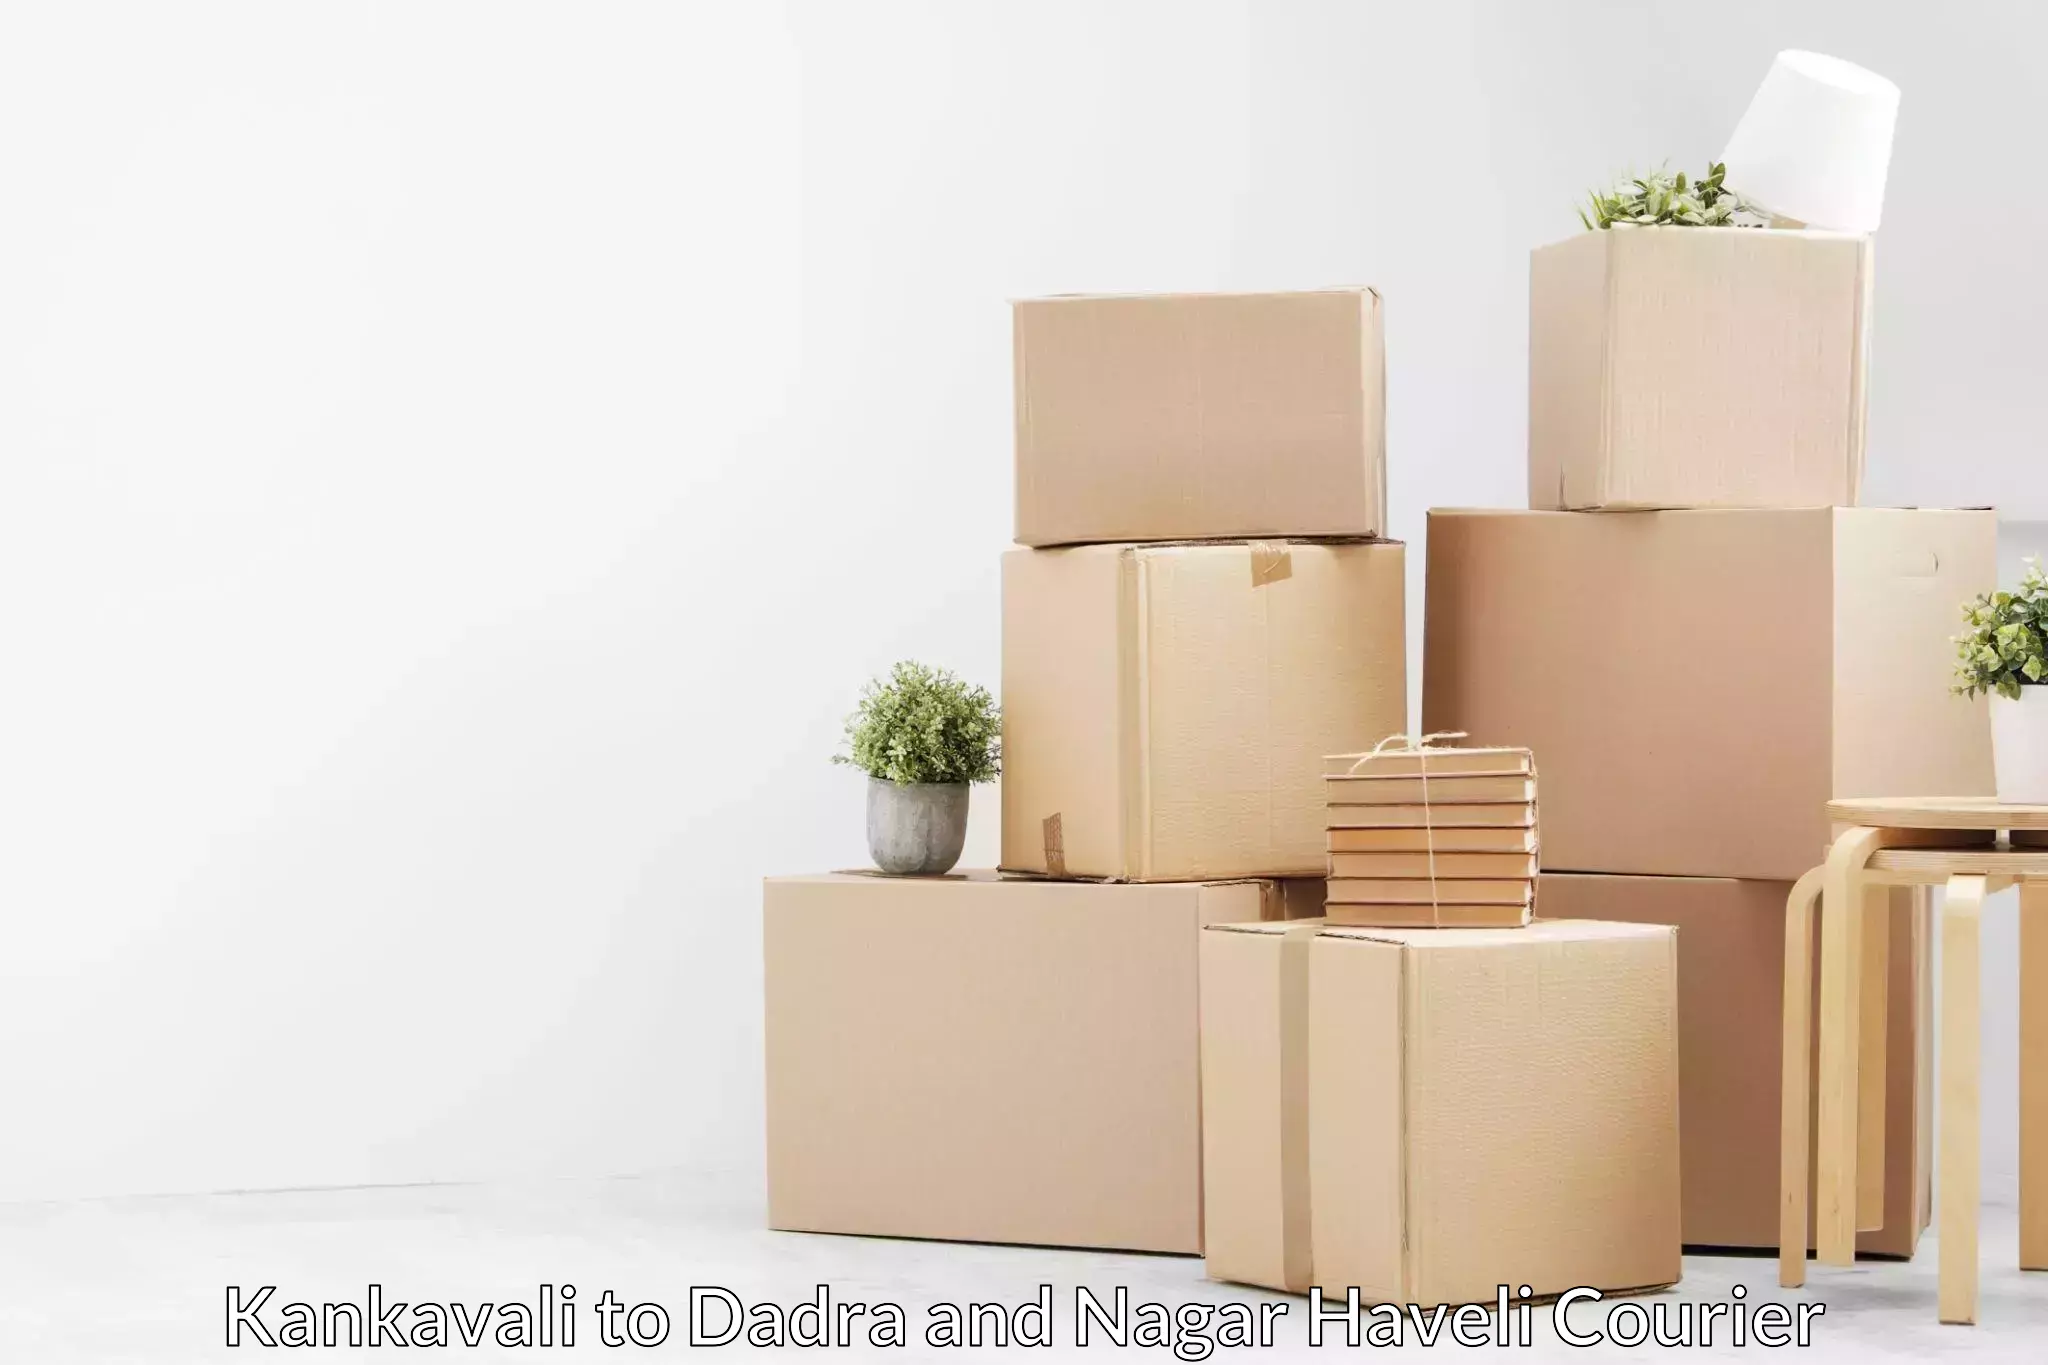 Moving and packing experts Kankavali to Dadra and Nagar Haveli